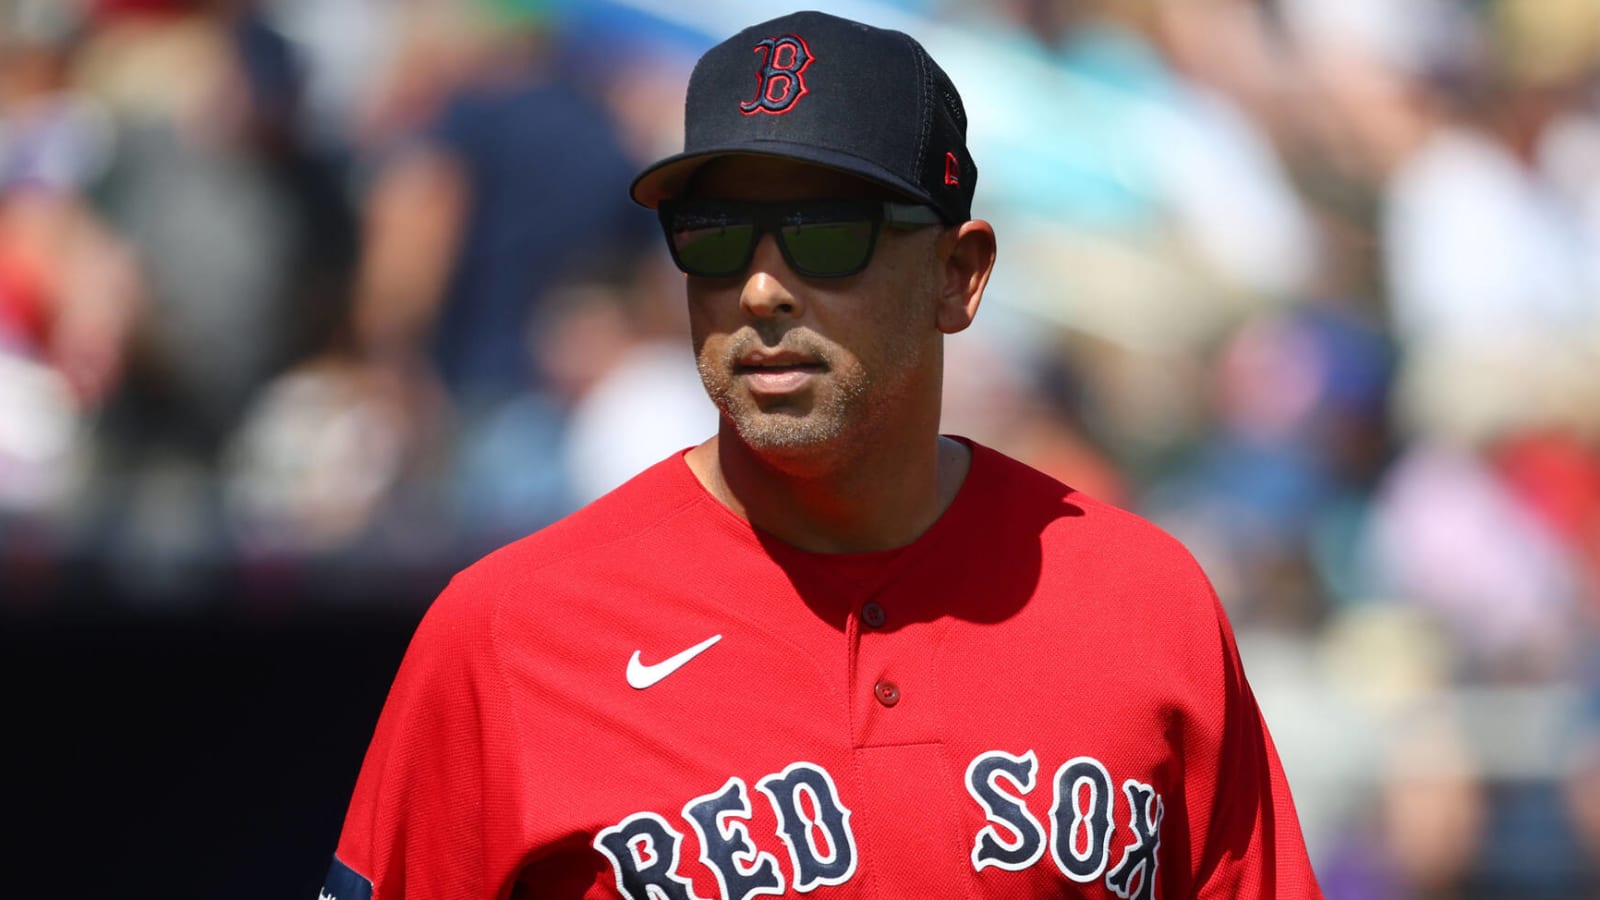 Red Sox manager gives candid take on pitch clock